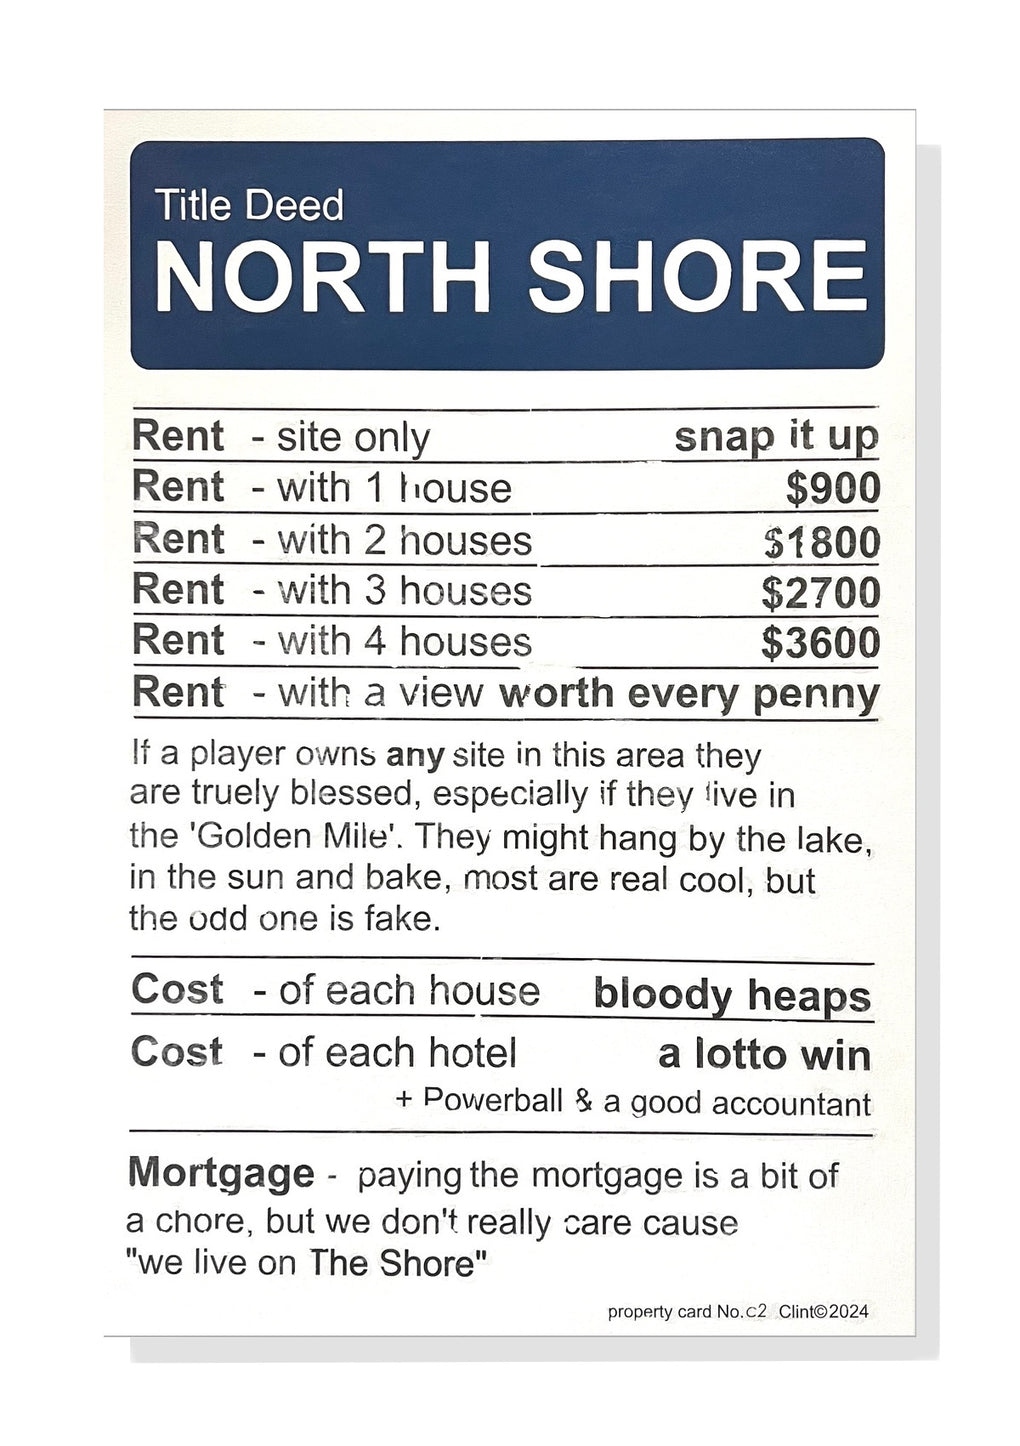 Title Deed North Shore c2